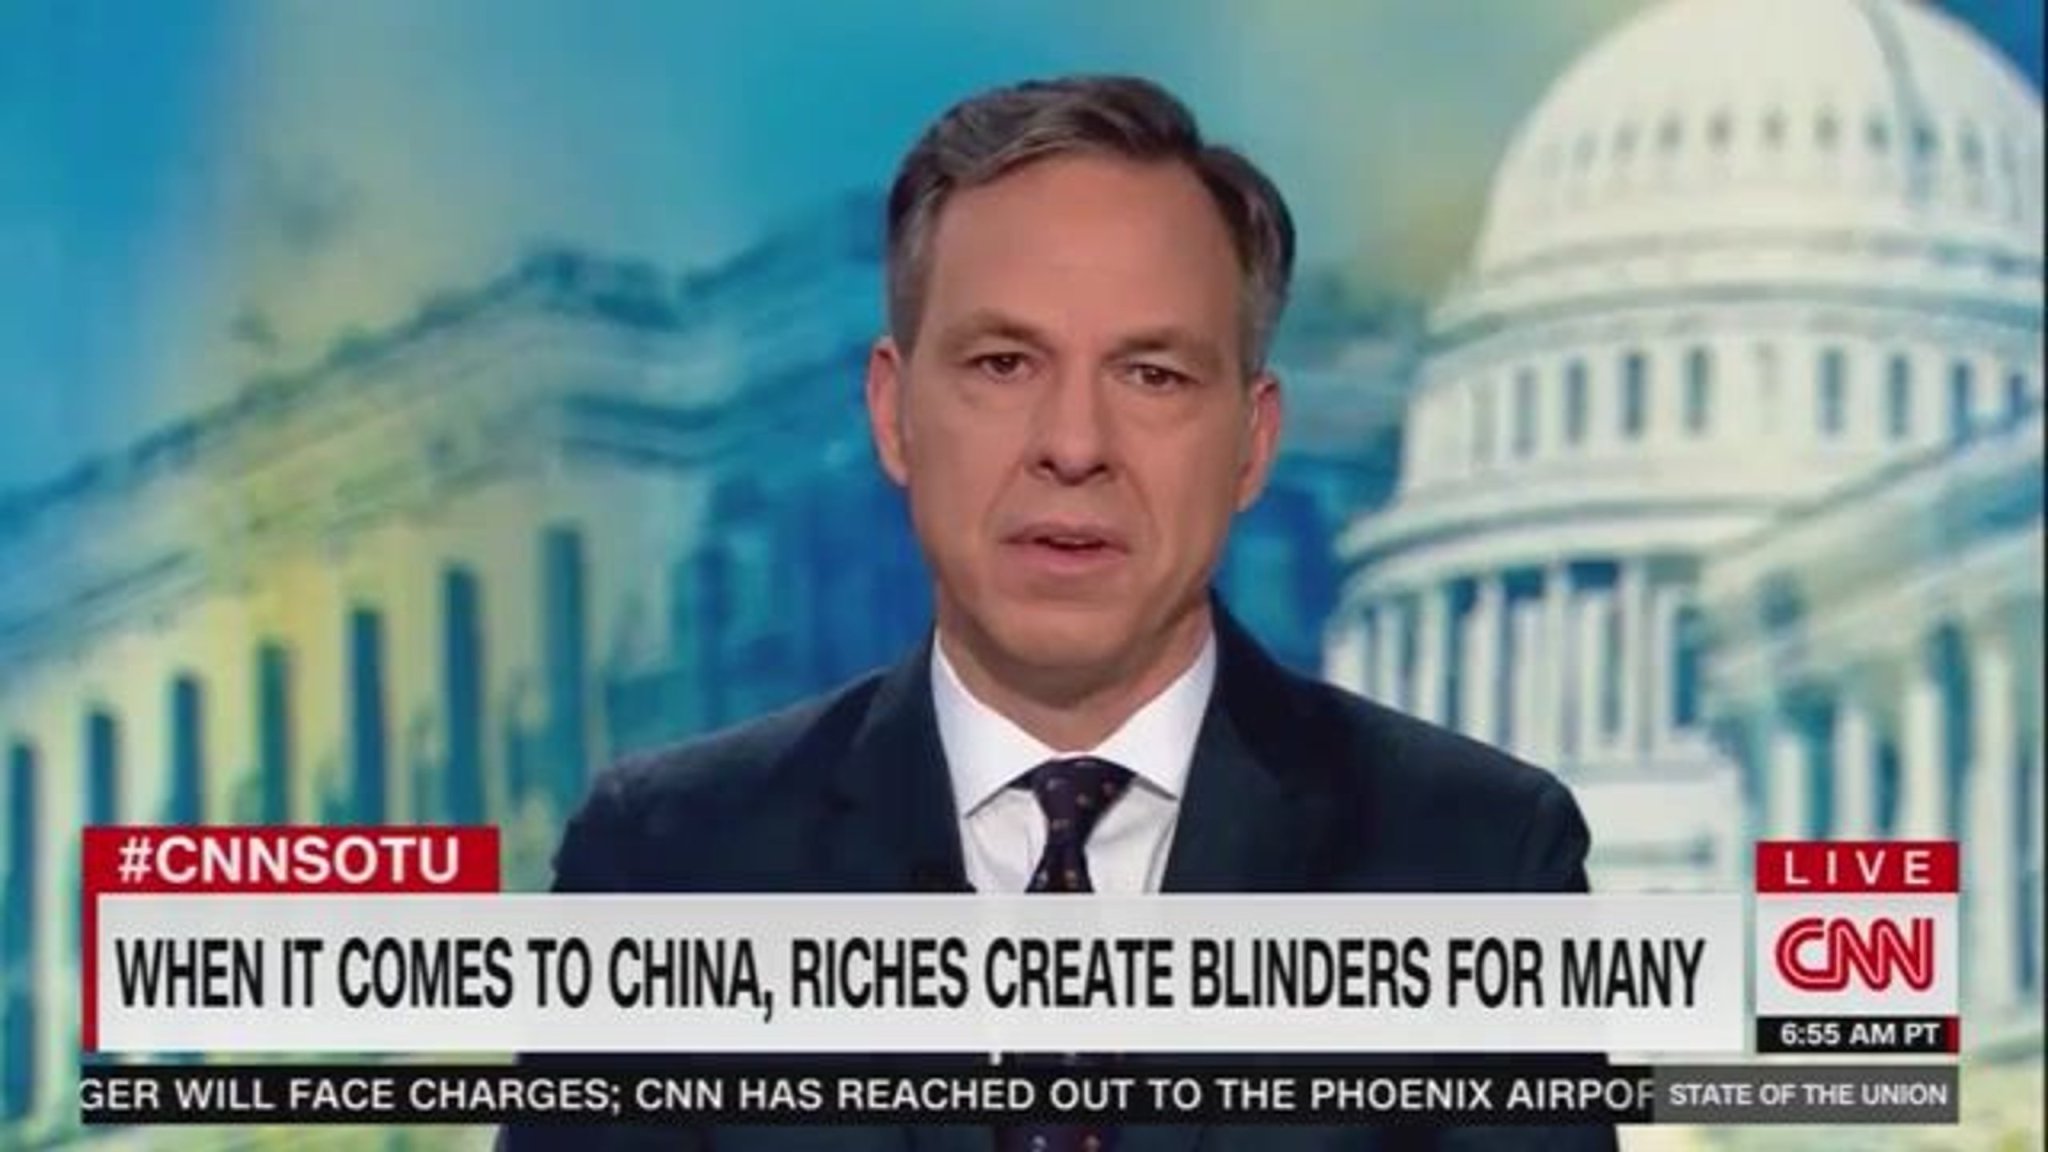 Jake Tapper slams Olympic Committee, NBA, Hollywood & Wall Street over China relationships despite human rights issues.